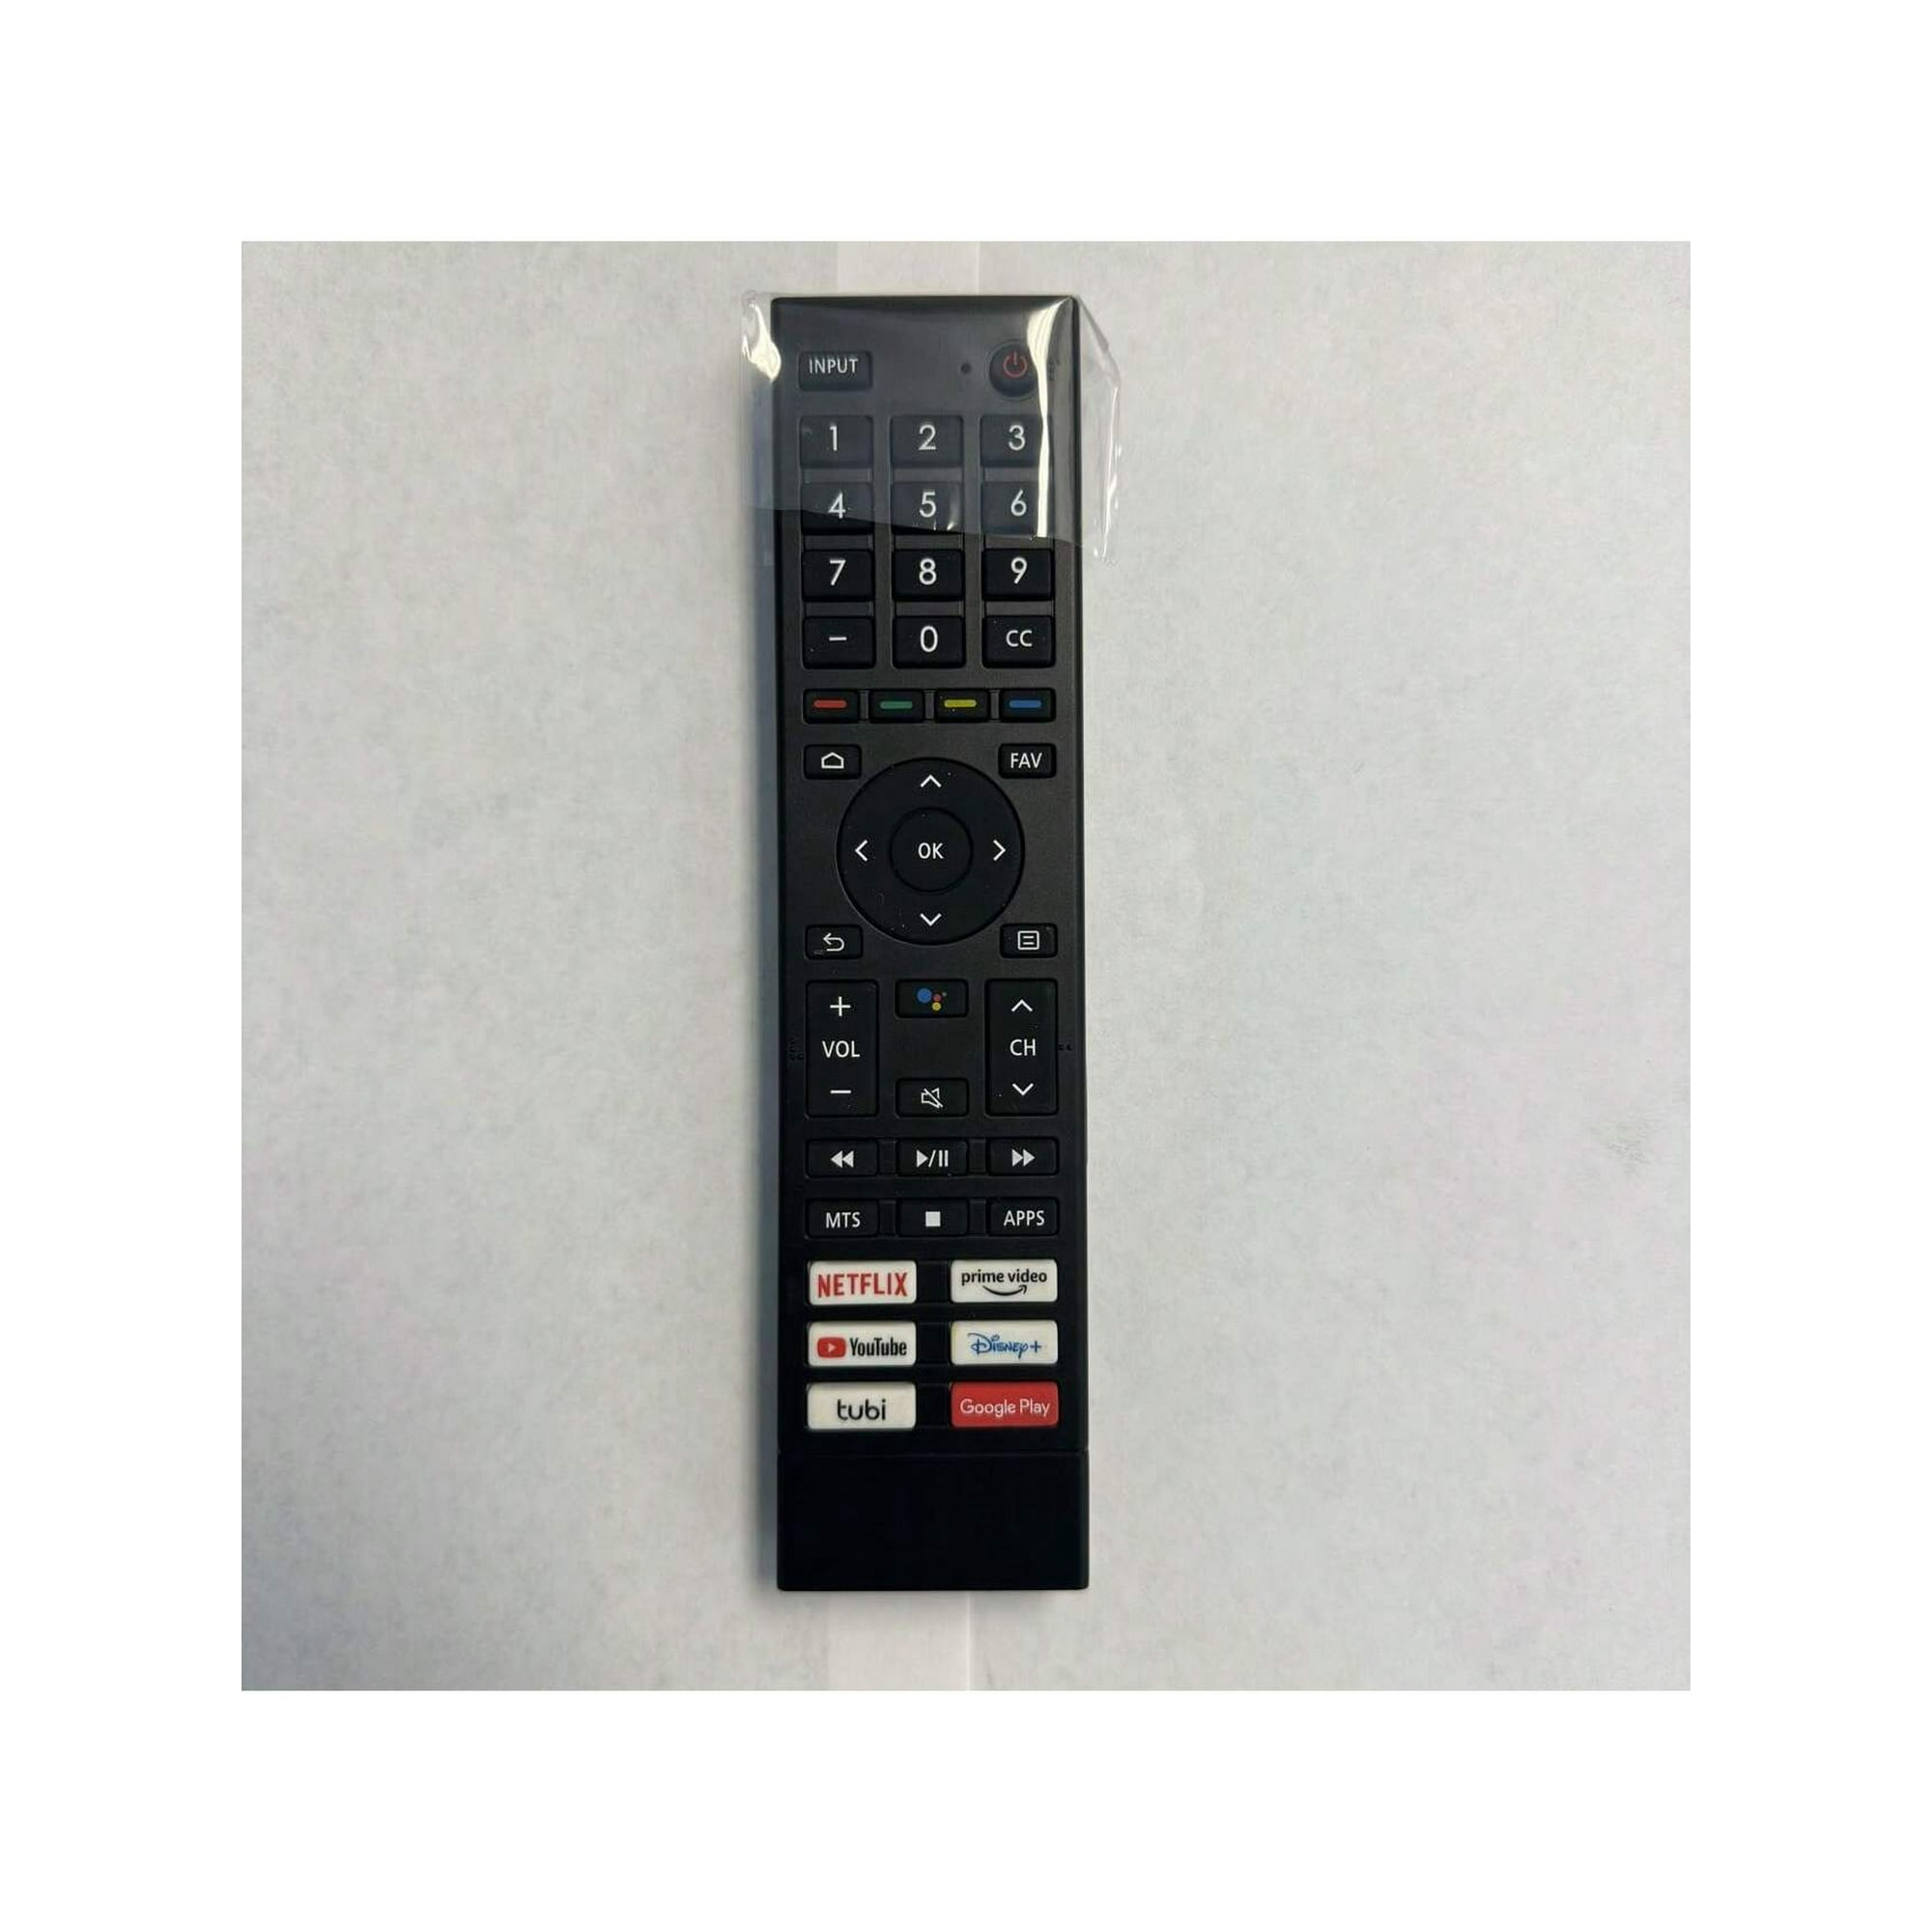 Erf3f80h third party remote control for hisense led/Uled/Uhd/Hdtv/4k/Android smart tv, erf3f80h replacement, for a66fua a68g a6gq u6g and more